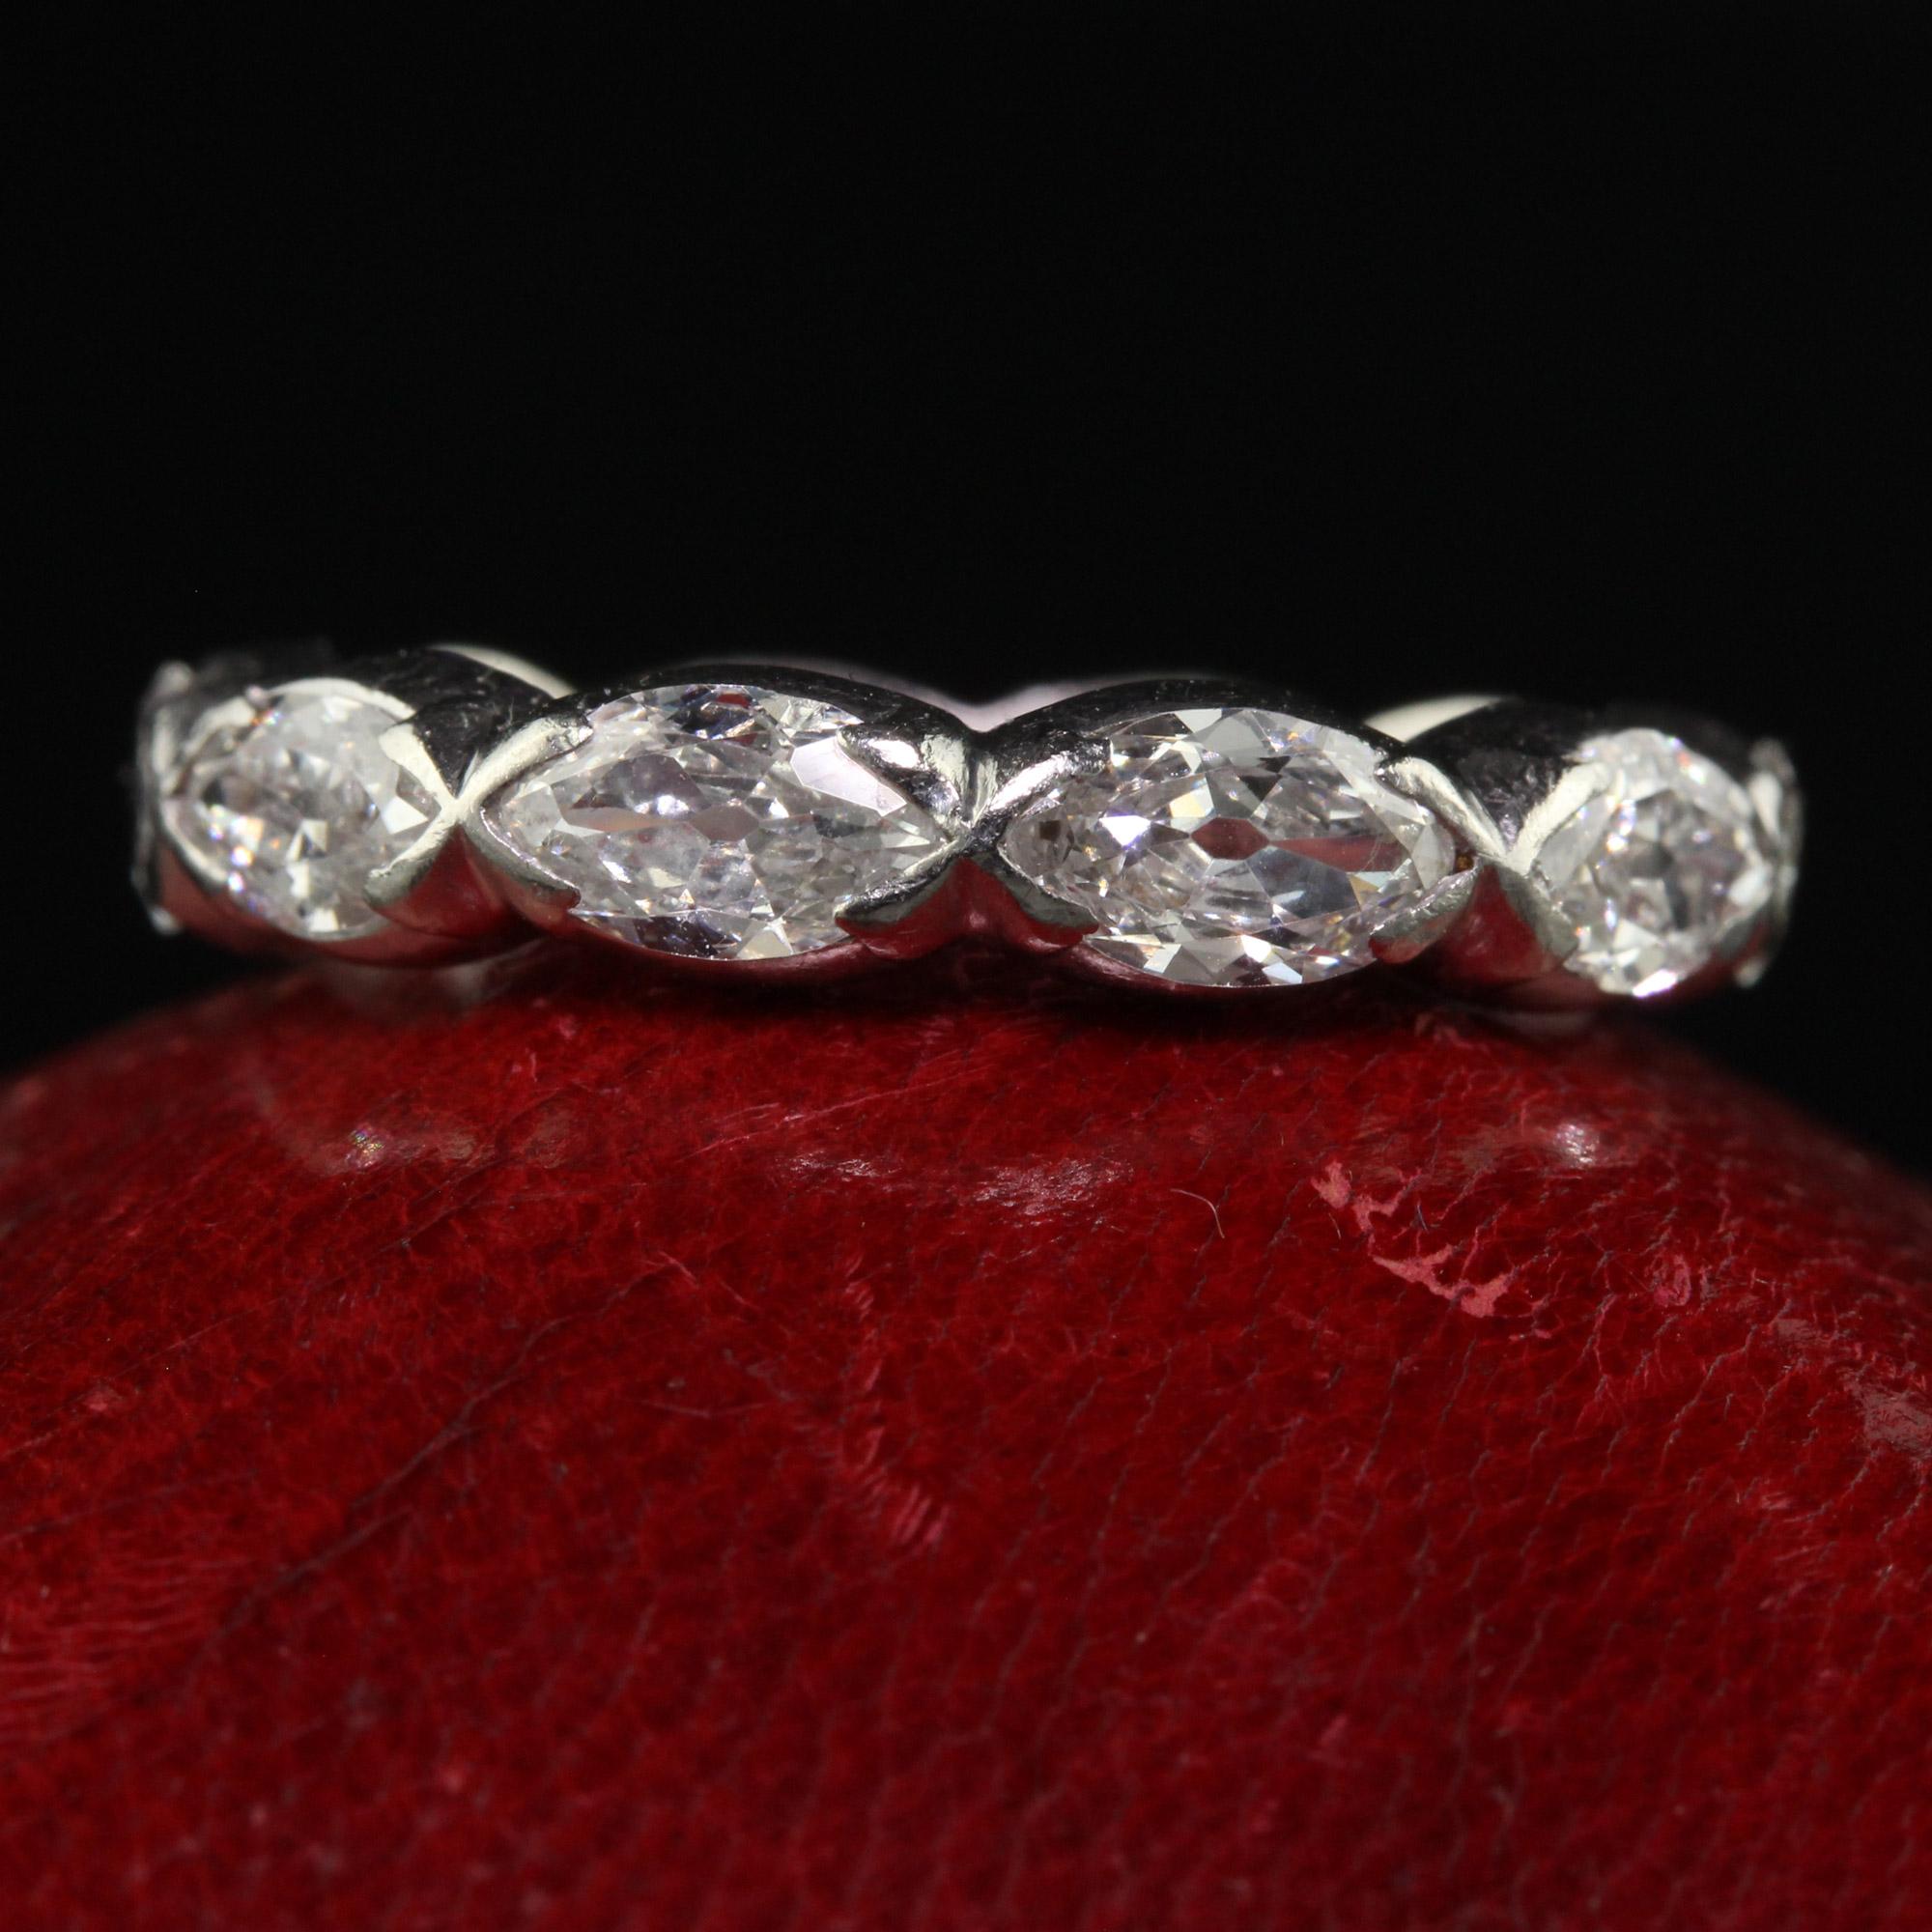 Beautiful Antique Art Deco Platinum Old Cut Marquise Diamond Eternity Wedding Band. This incredible old cut marquise diamond wedding band is crafted in platinum. The ring has large old cut marquise set around the entire ring. The ring has a very